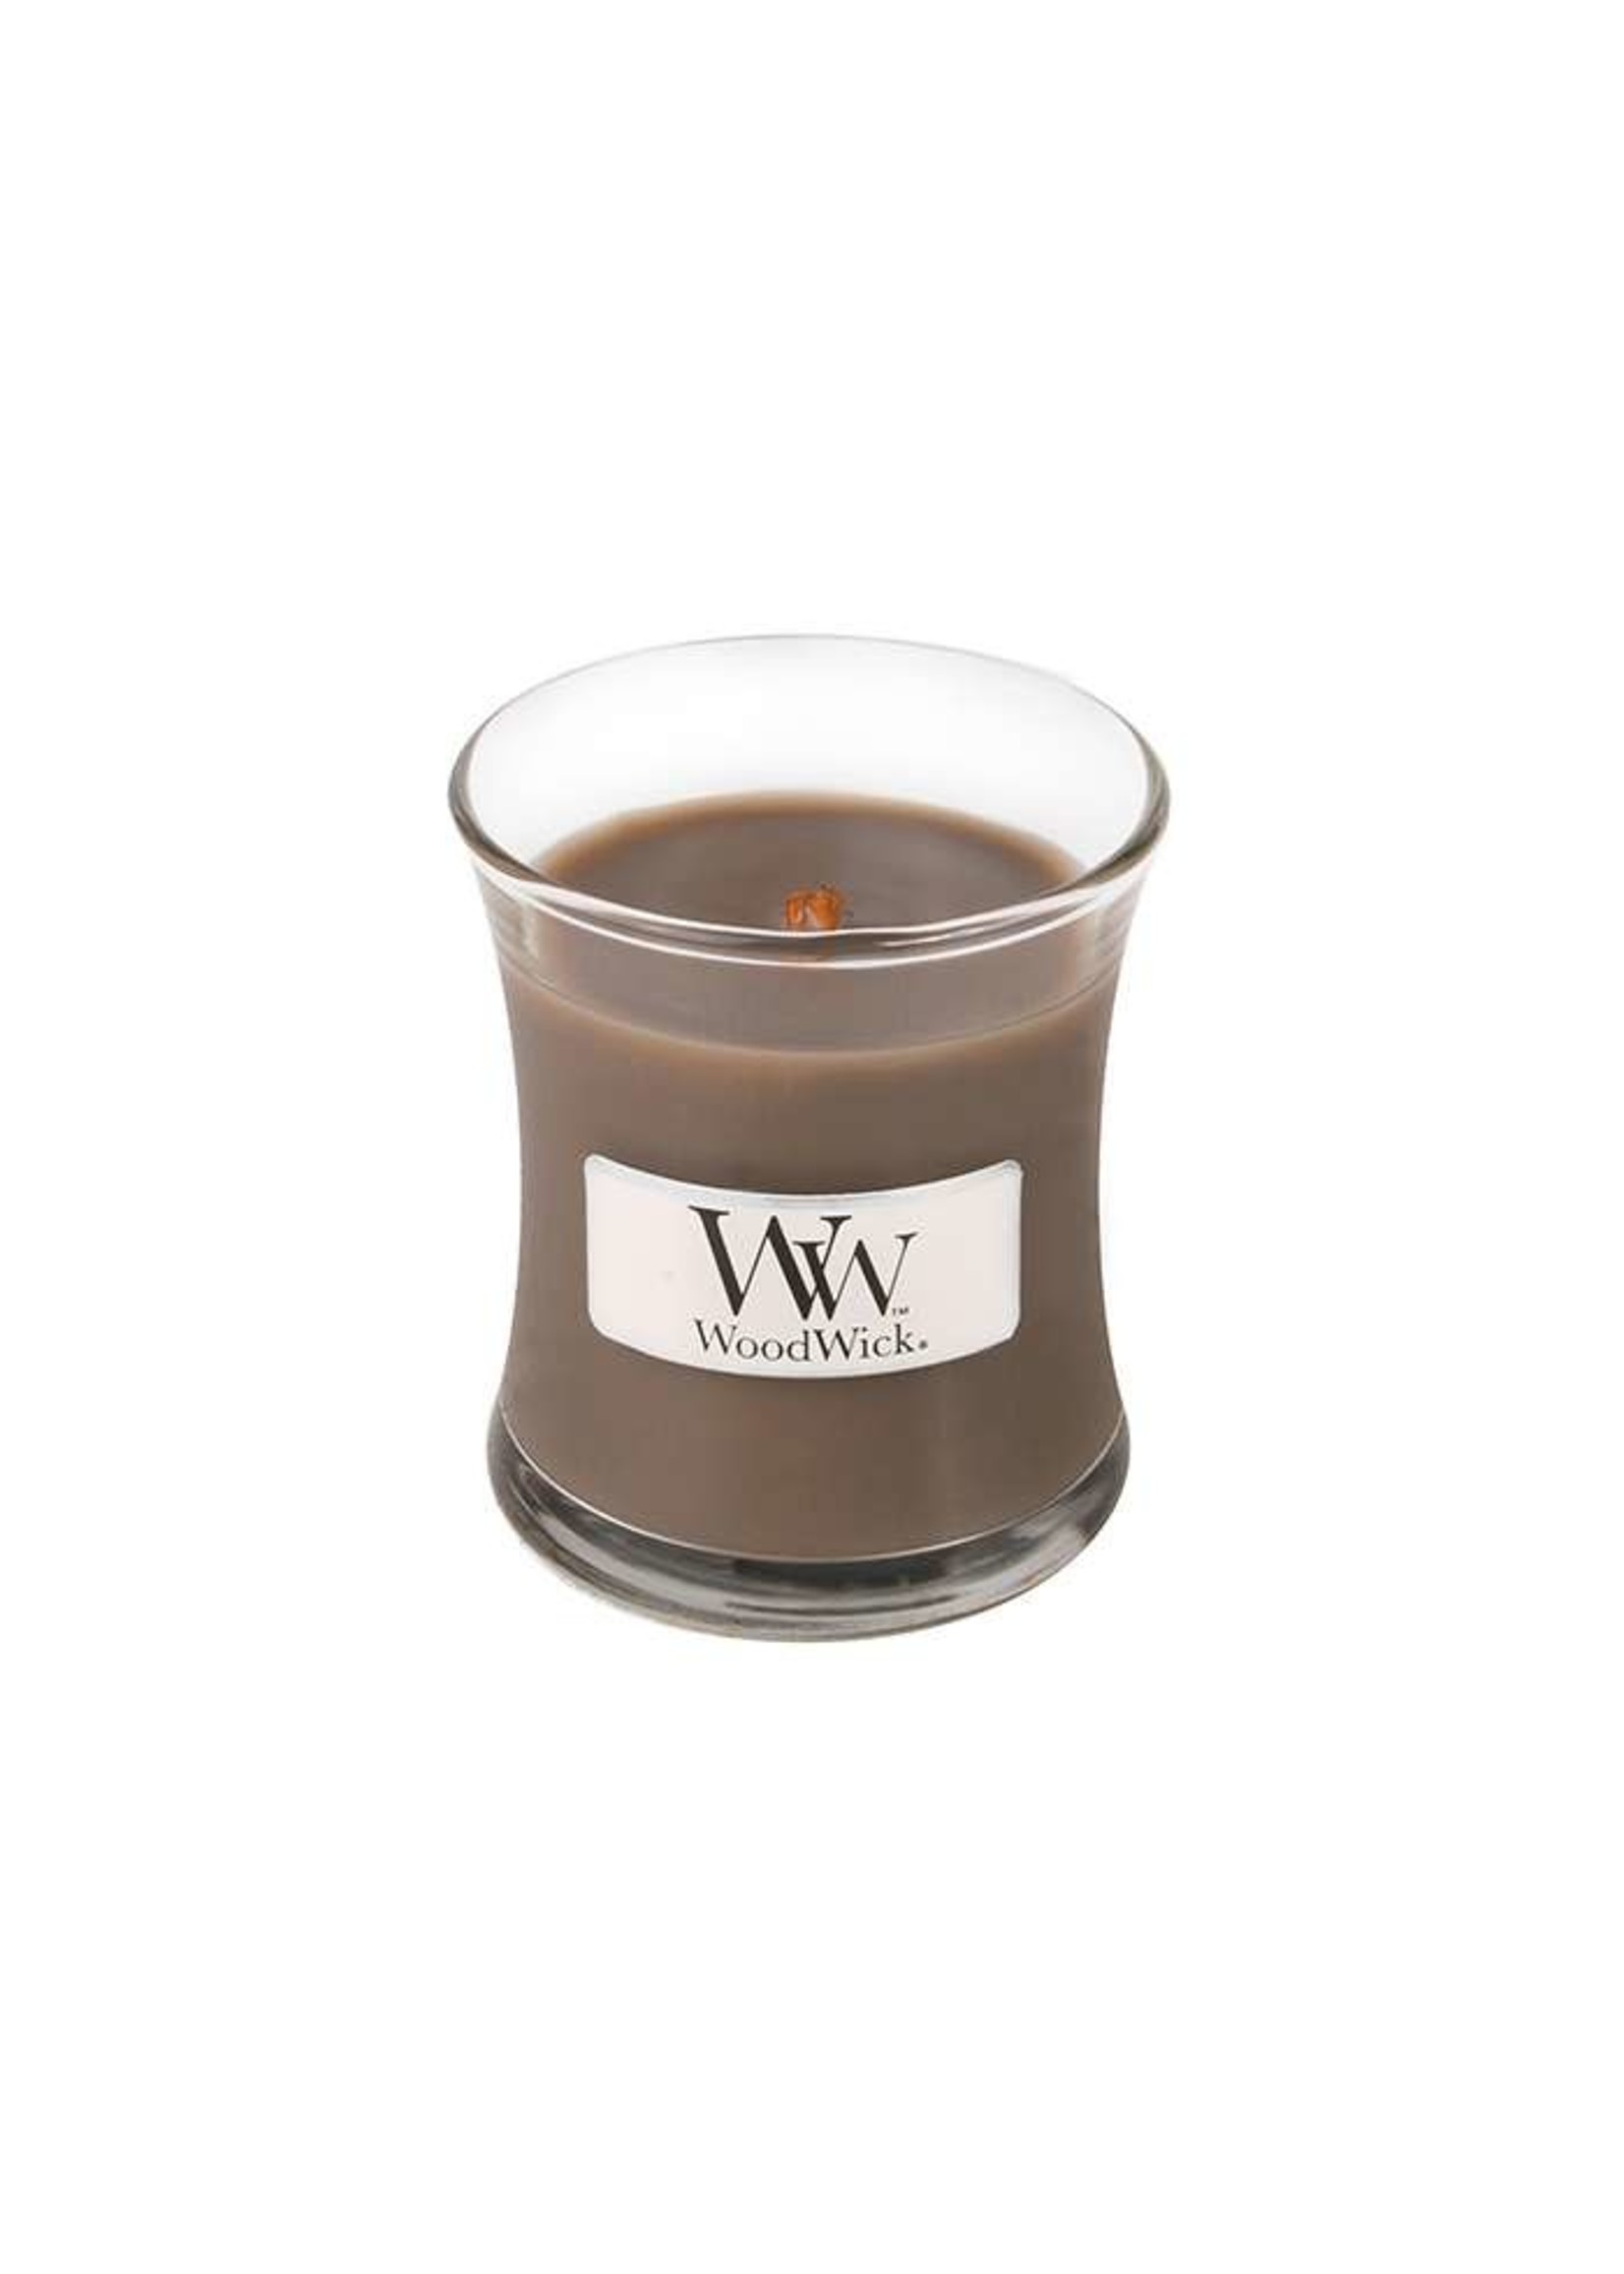 Woodwick MEDIUM CANDLE- 8 SCENTS TO CHOOSE FROM